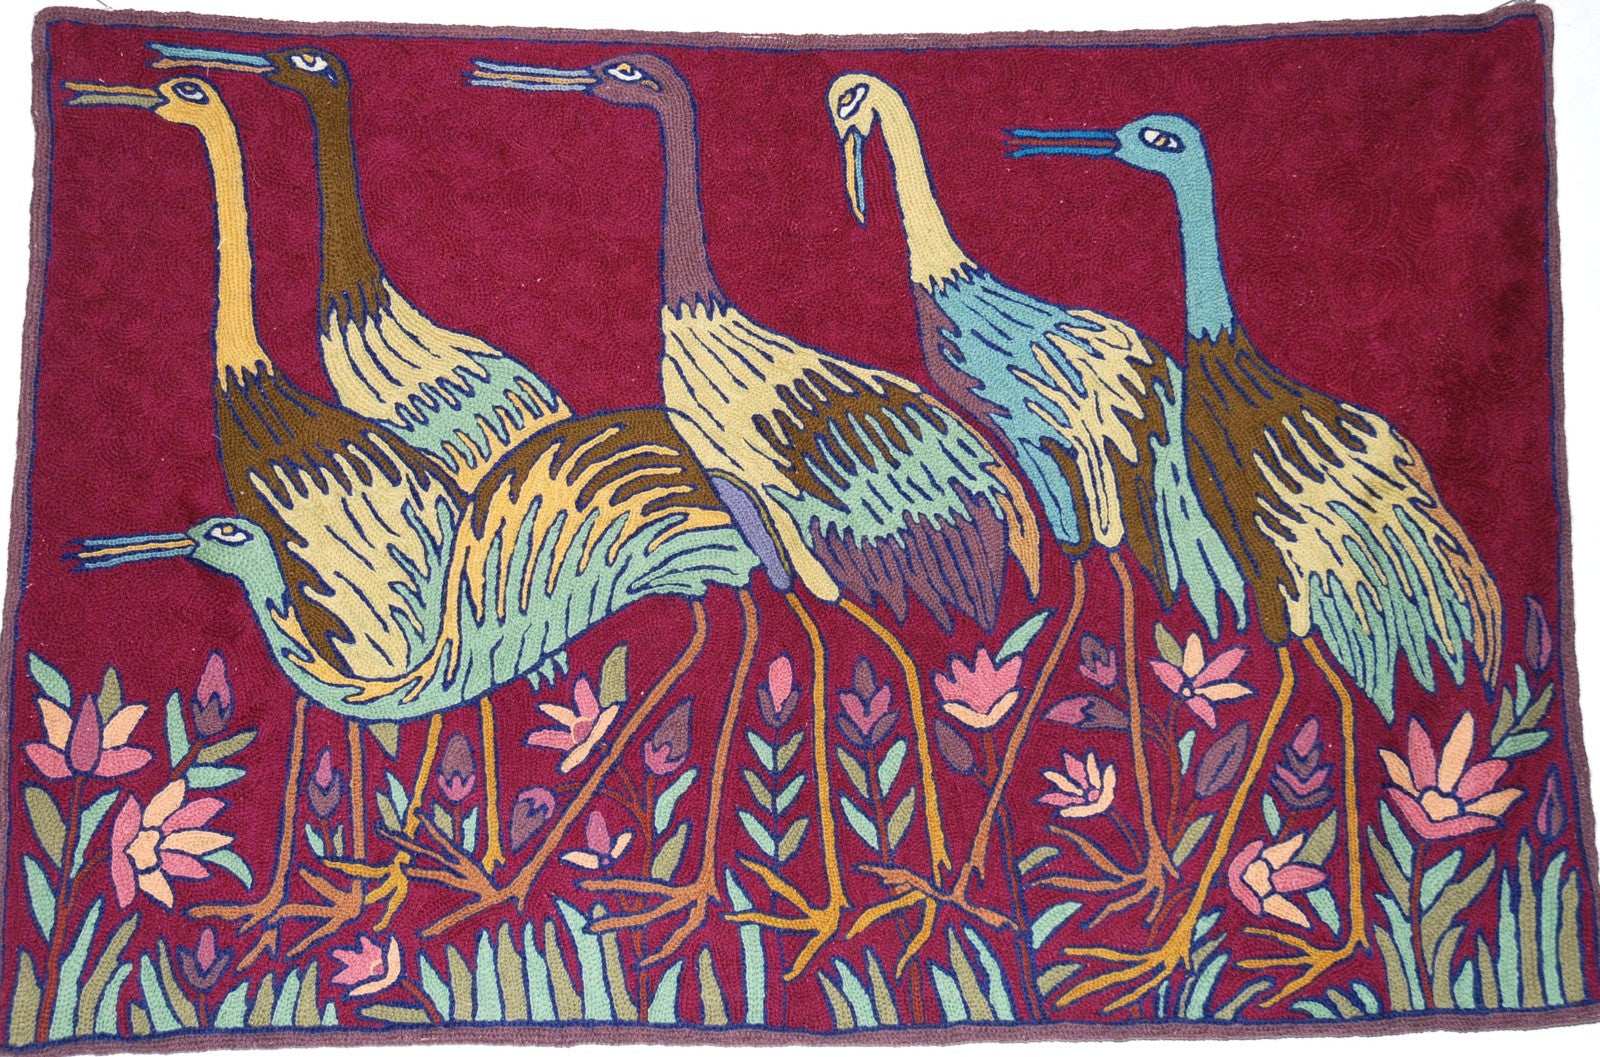 ChainStitch Tapestry Woolen Area Rug Birds, Multicolor Embroidery 2x3 feet #CWR6111